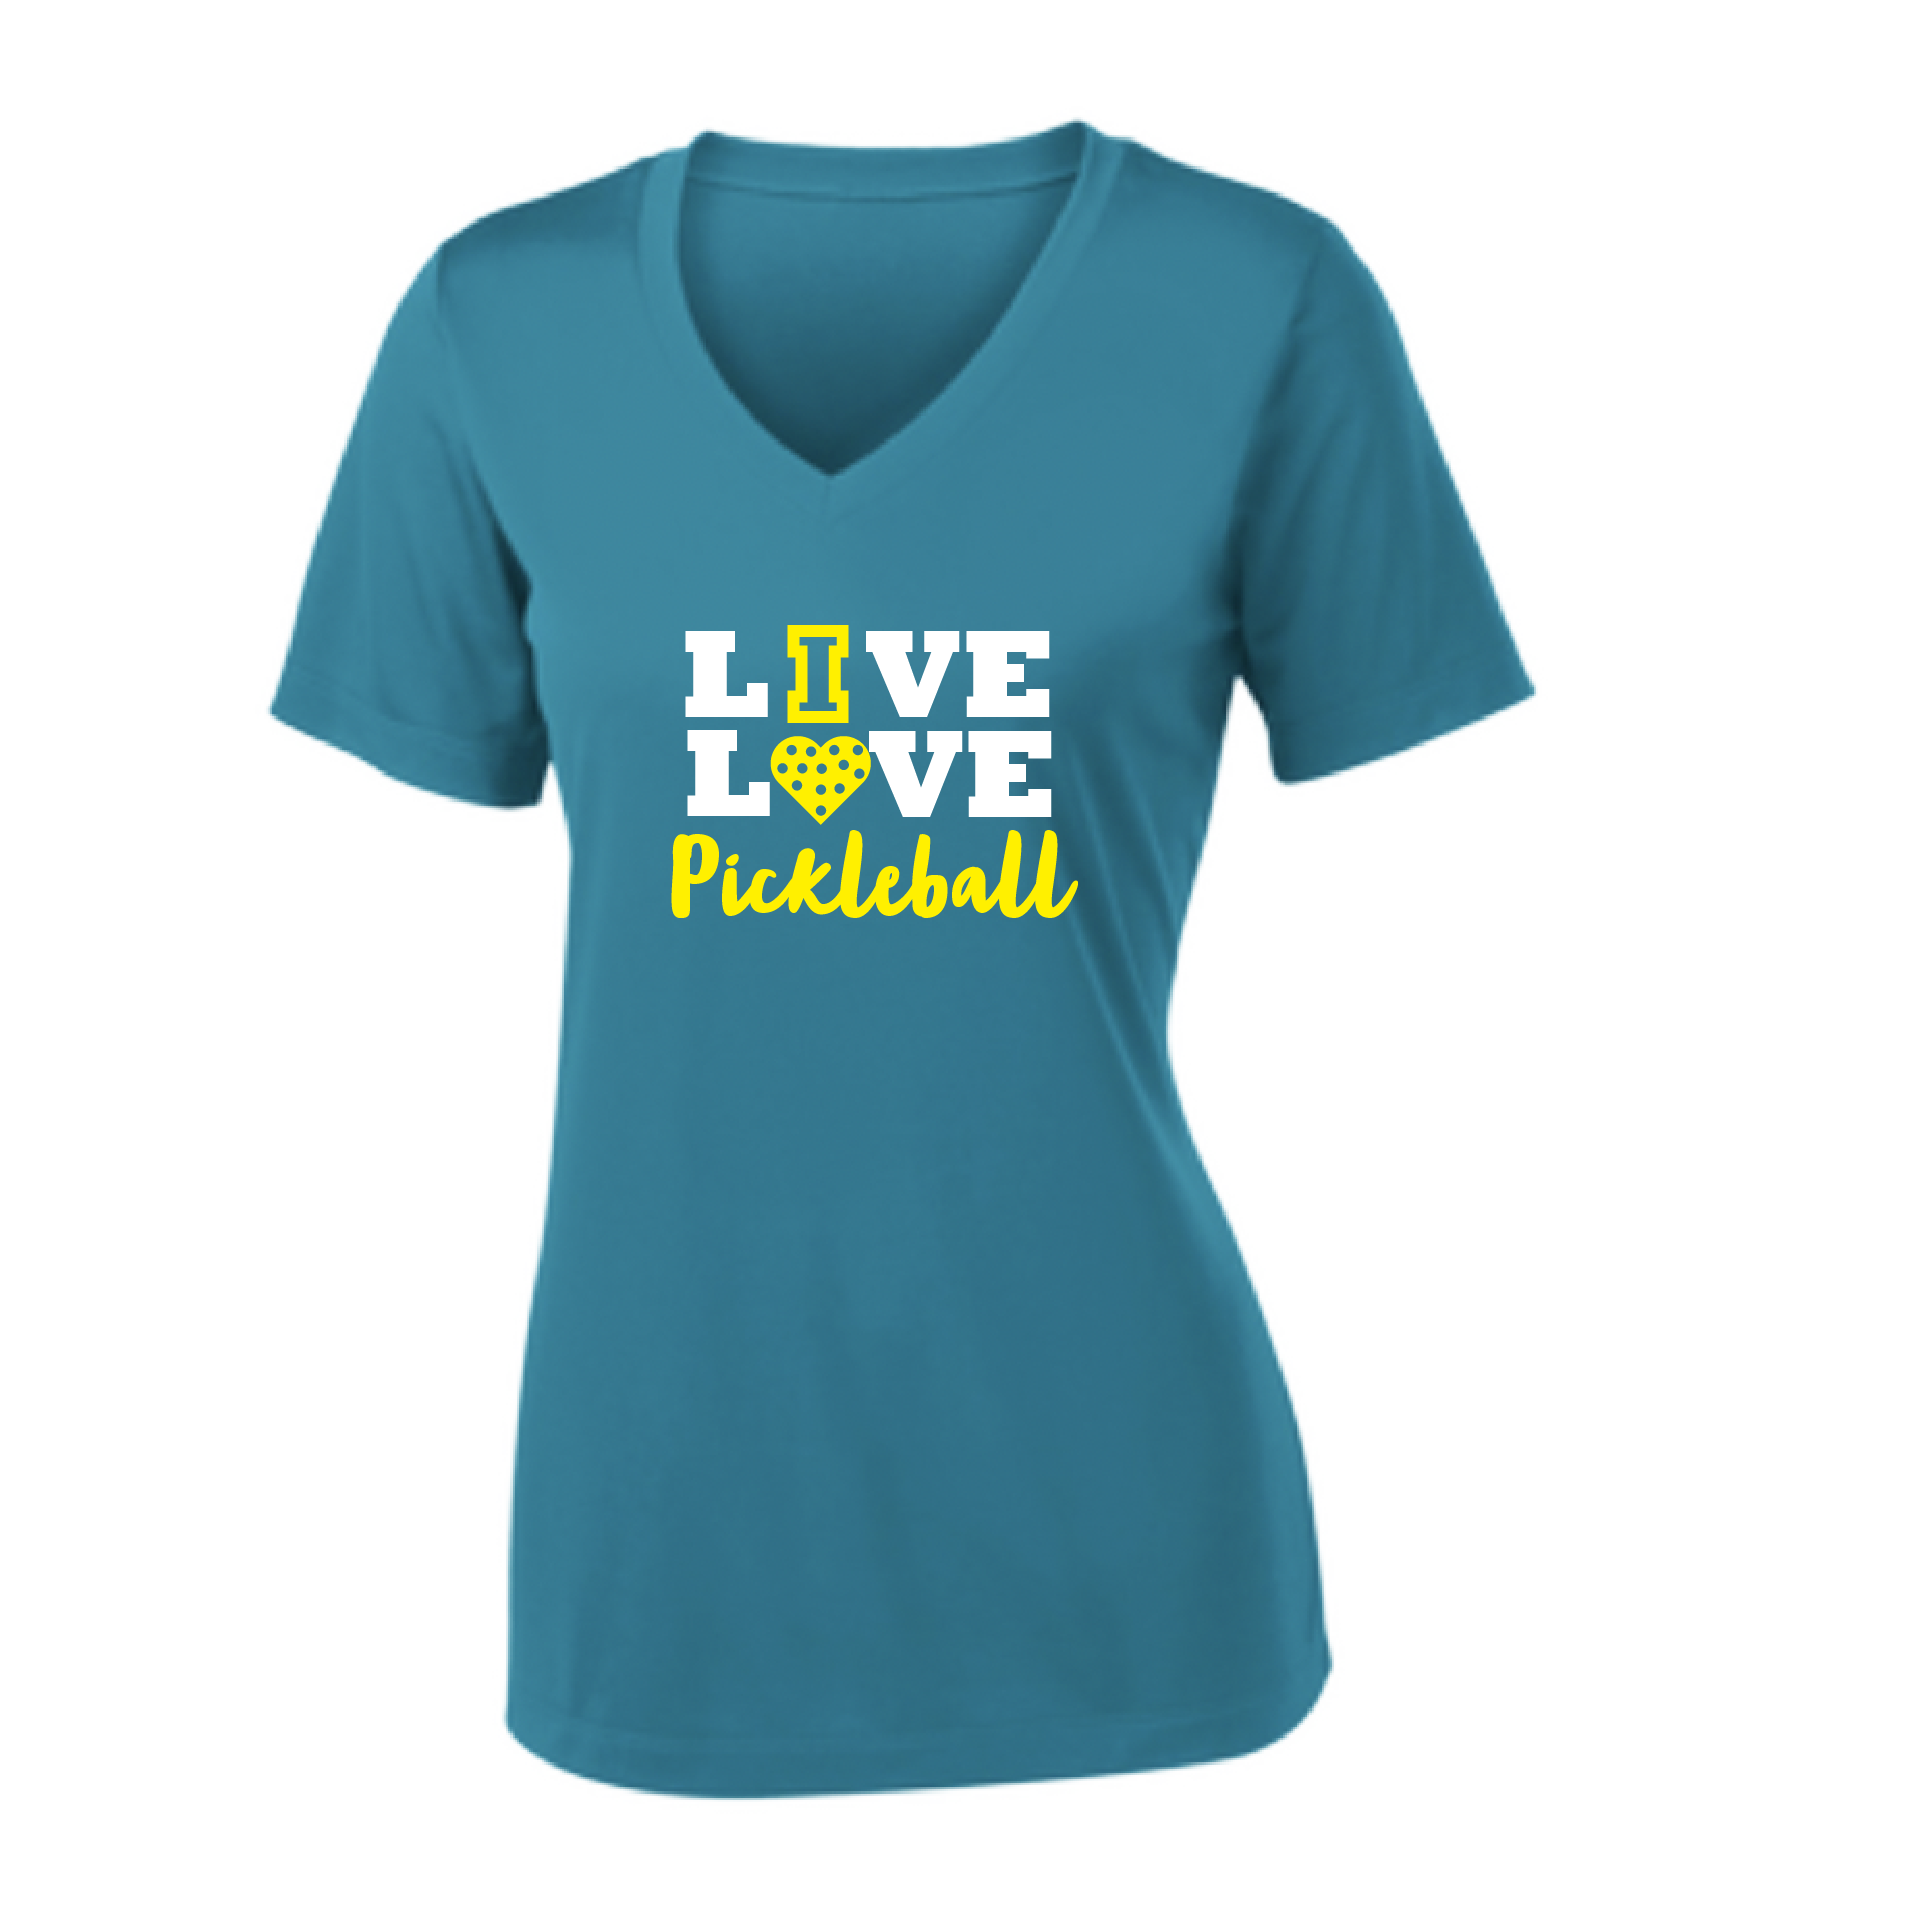 Pickleball Design: Live Love Pickleball  Women's Style: Short Sleeve V-Neck  Turn up the volume in this Women's shirt with its perfect mix of softness and attitude. Material is ultra-comfortable with moisture wicking properties and tri-blend softness. PosiCharge technology locks in color. Highly breathable and lightweight.